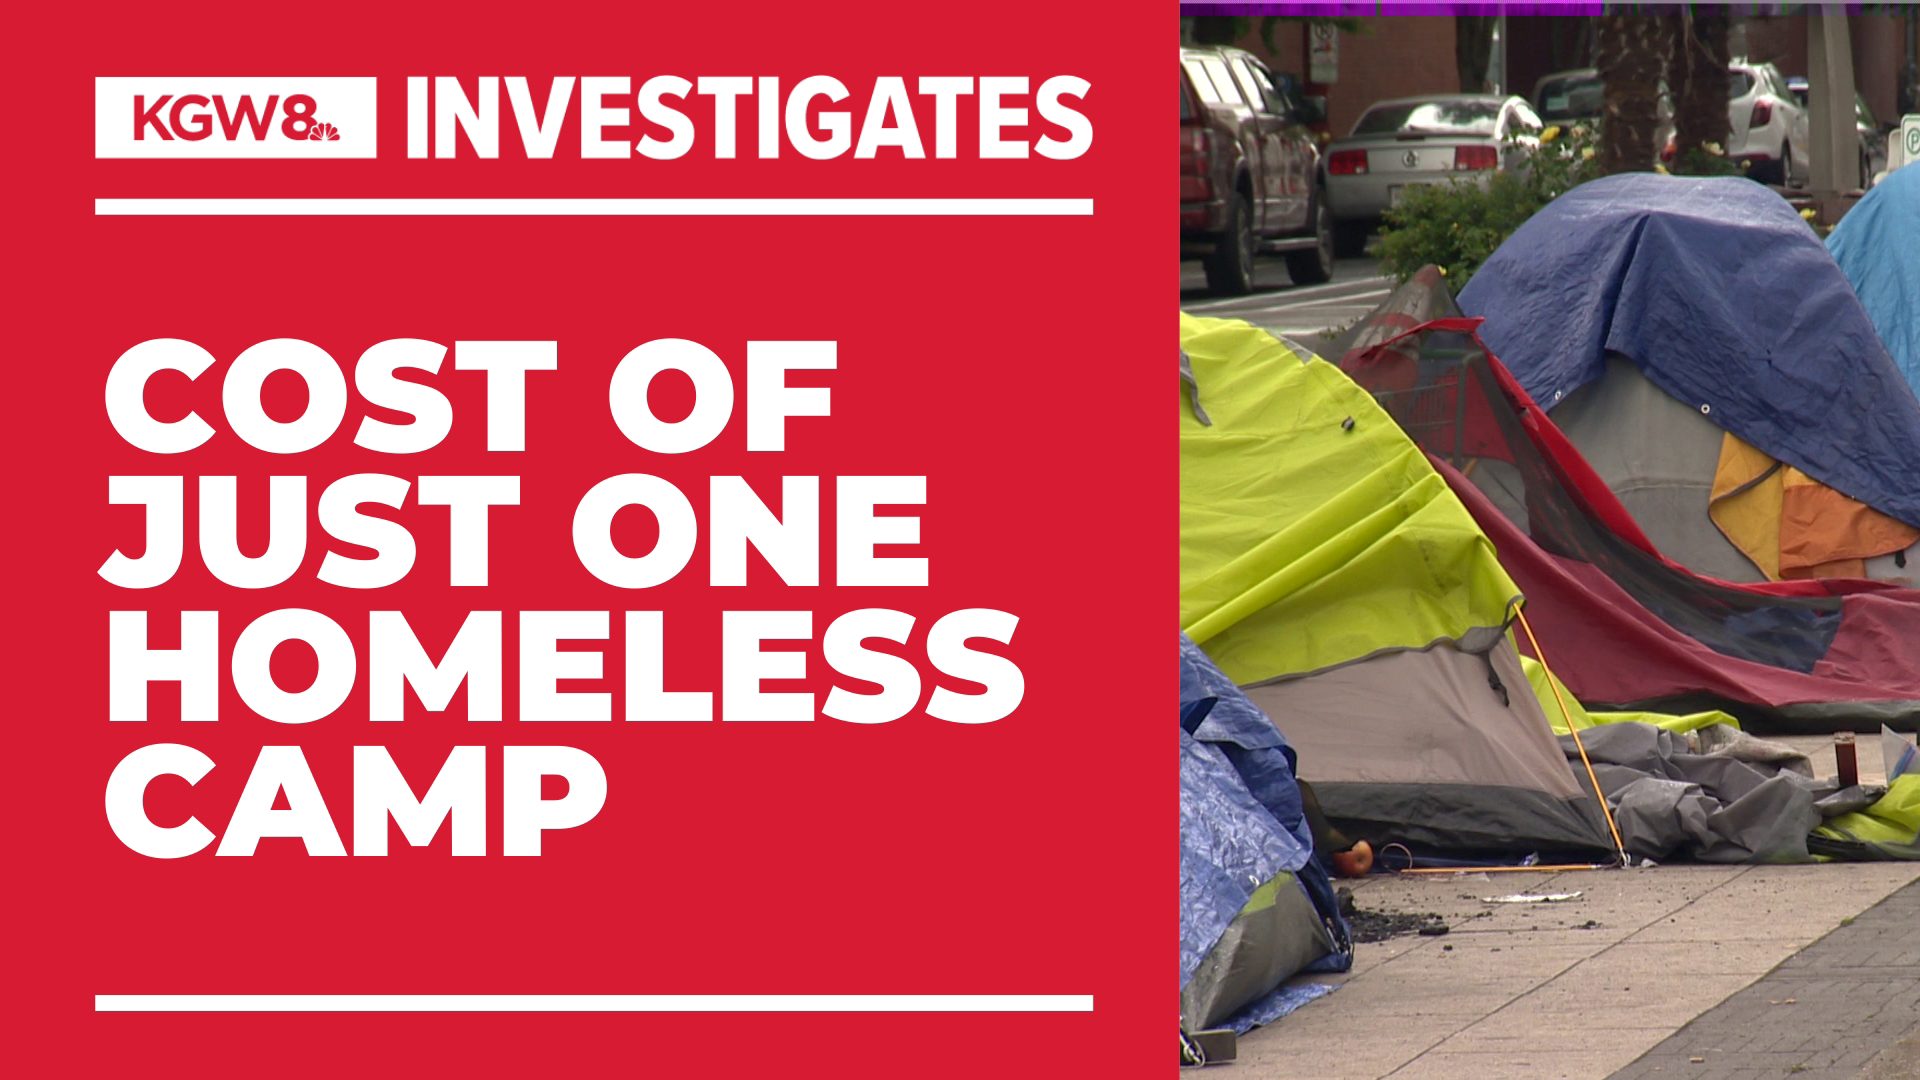 KGW spoke with neighbors, business owners and those experiencing homelessness to better understand the widespread impact of a single homeless encampment.